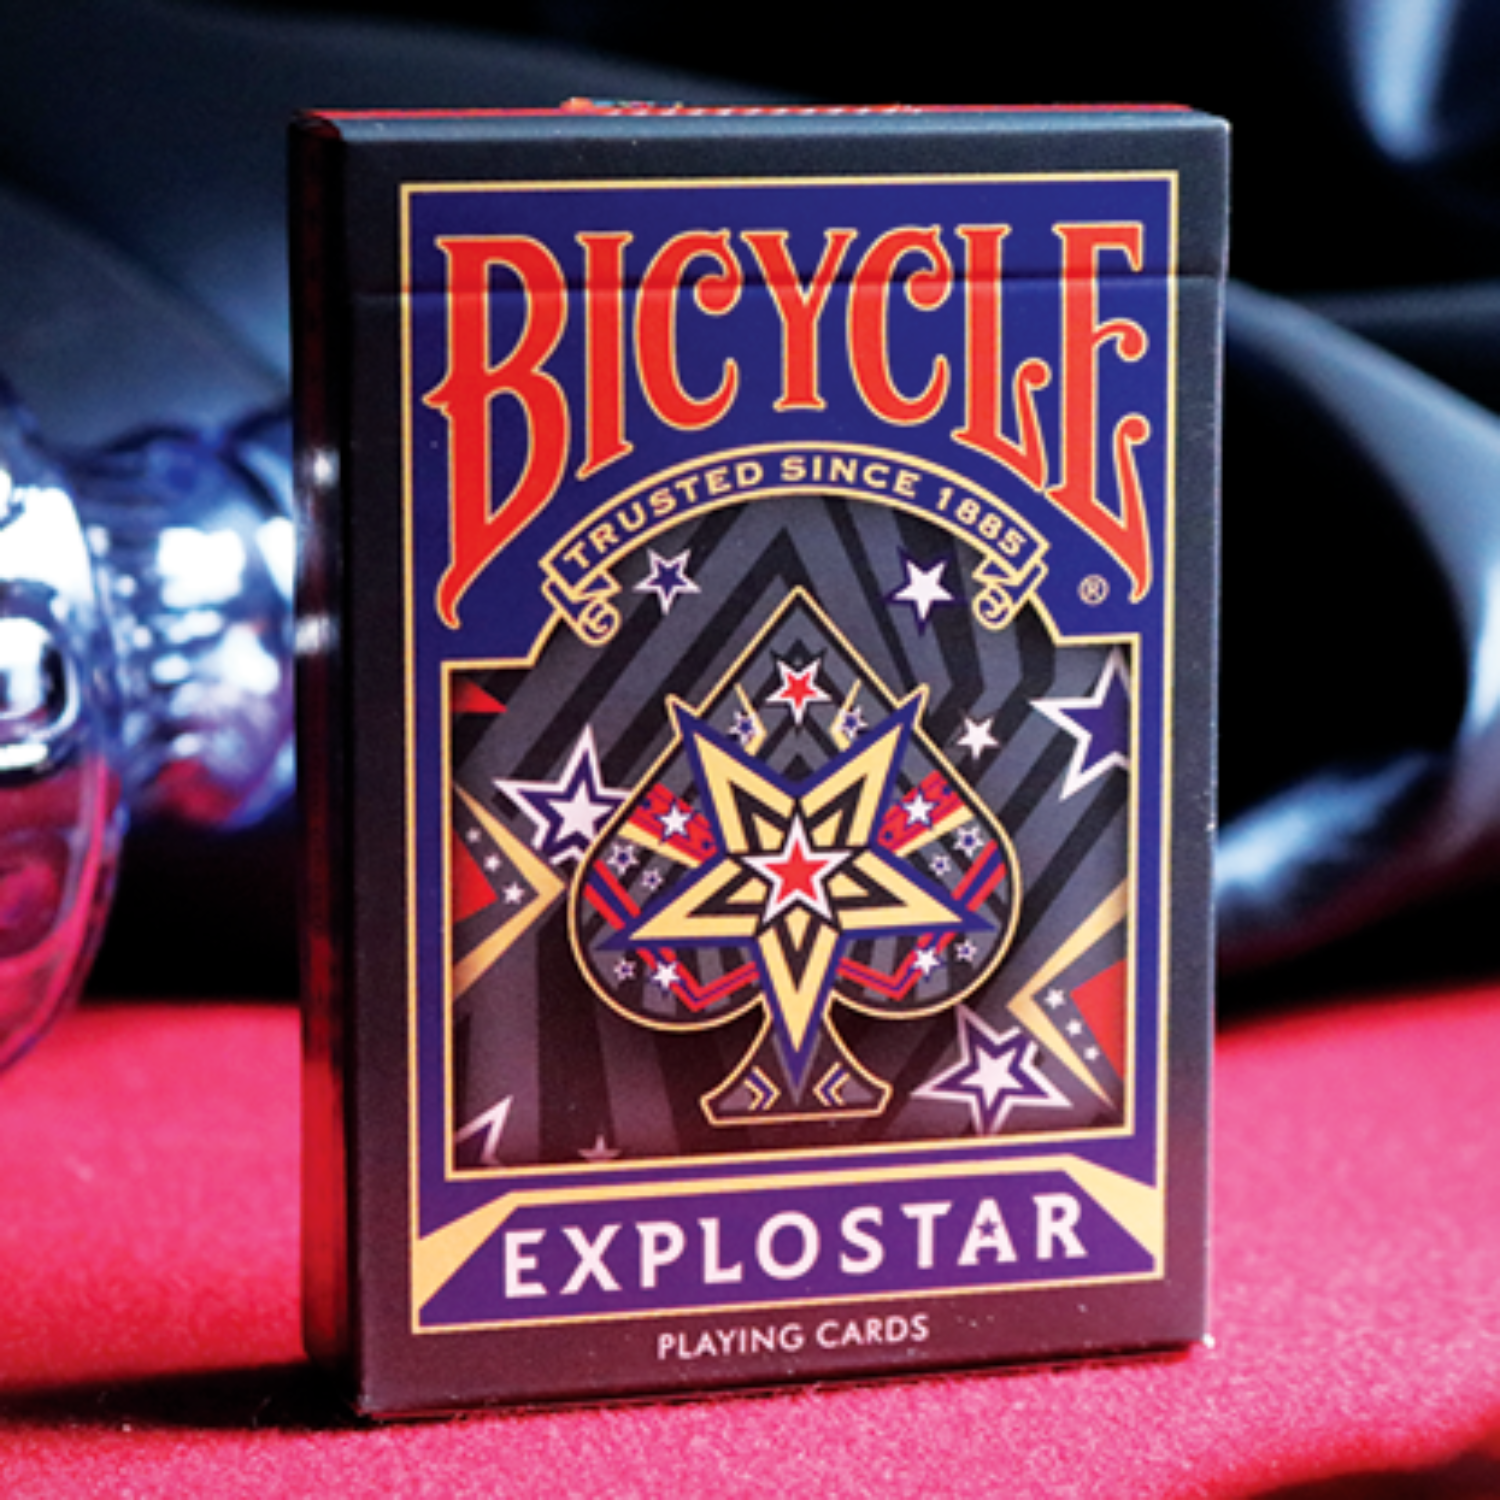 CA10 익스플로스타덱 Bicycle Explostar Playing Cards